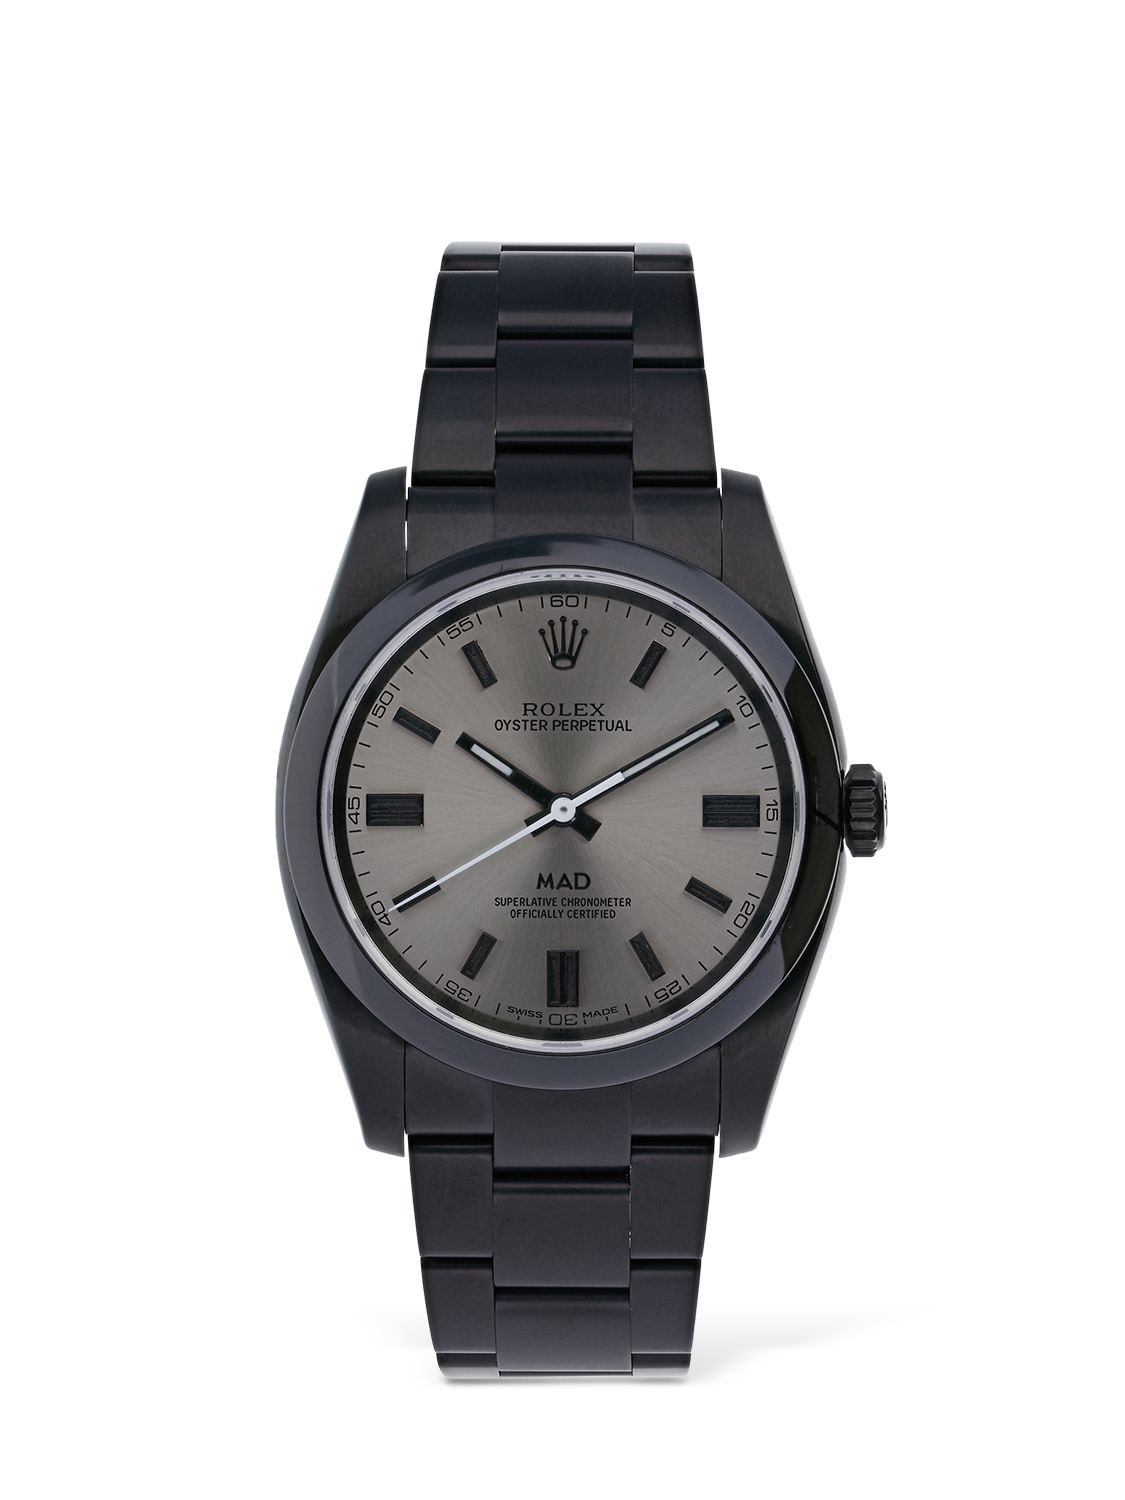 36mm Rolex Oyster Perpetual Watch